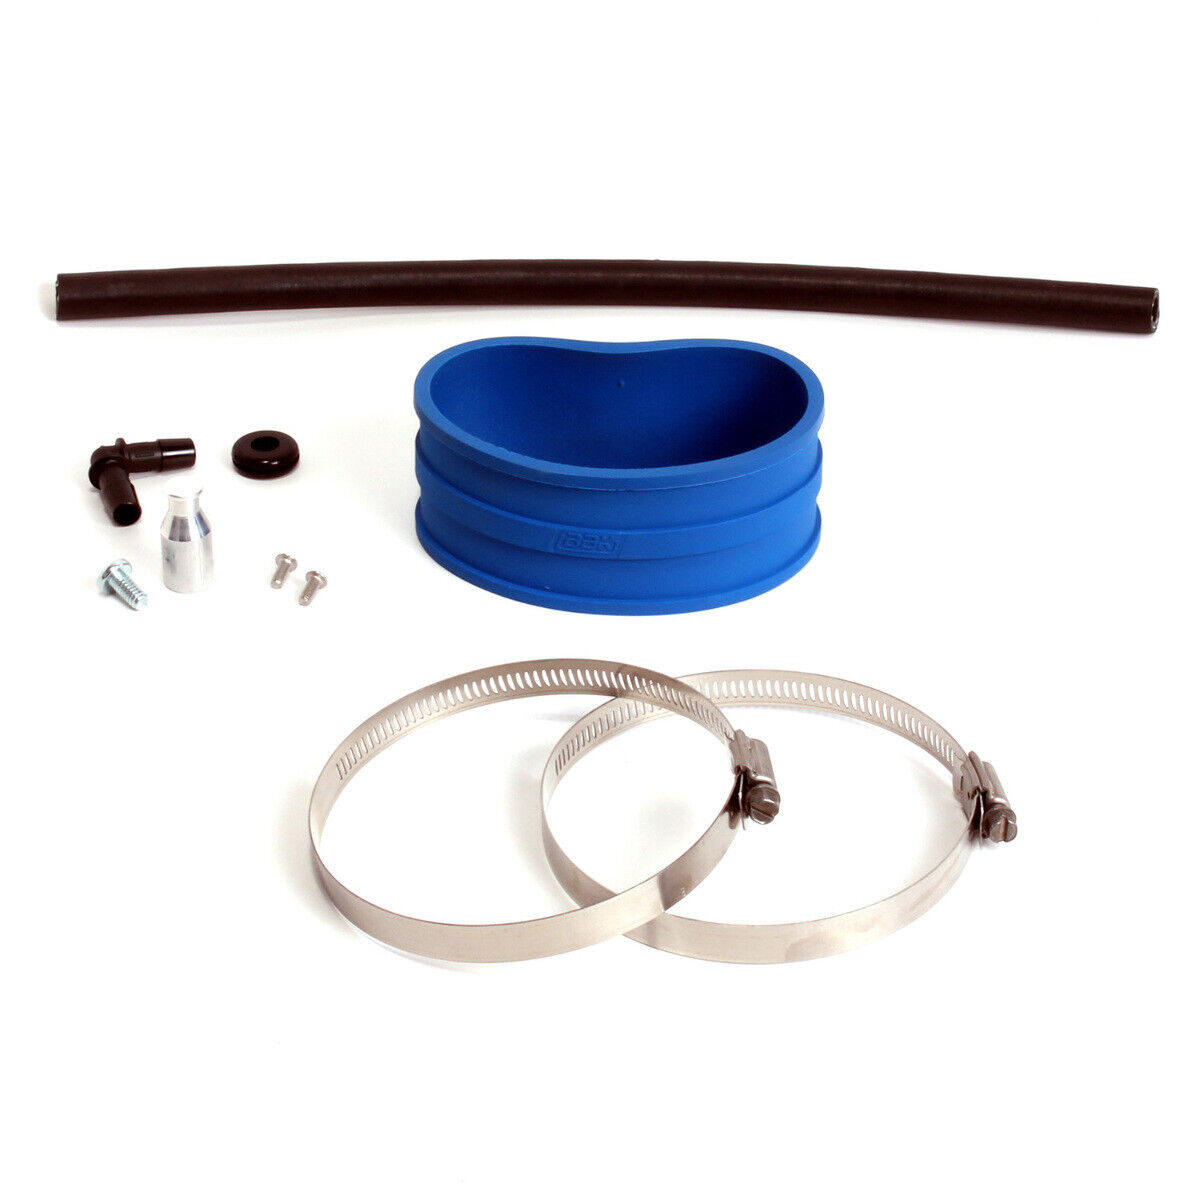 1771 Cold Air Intake Replacement Hose And Hardware Kit-17712